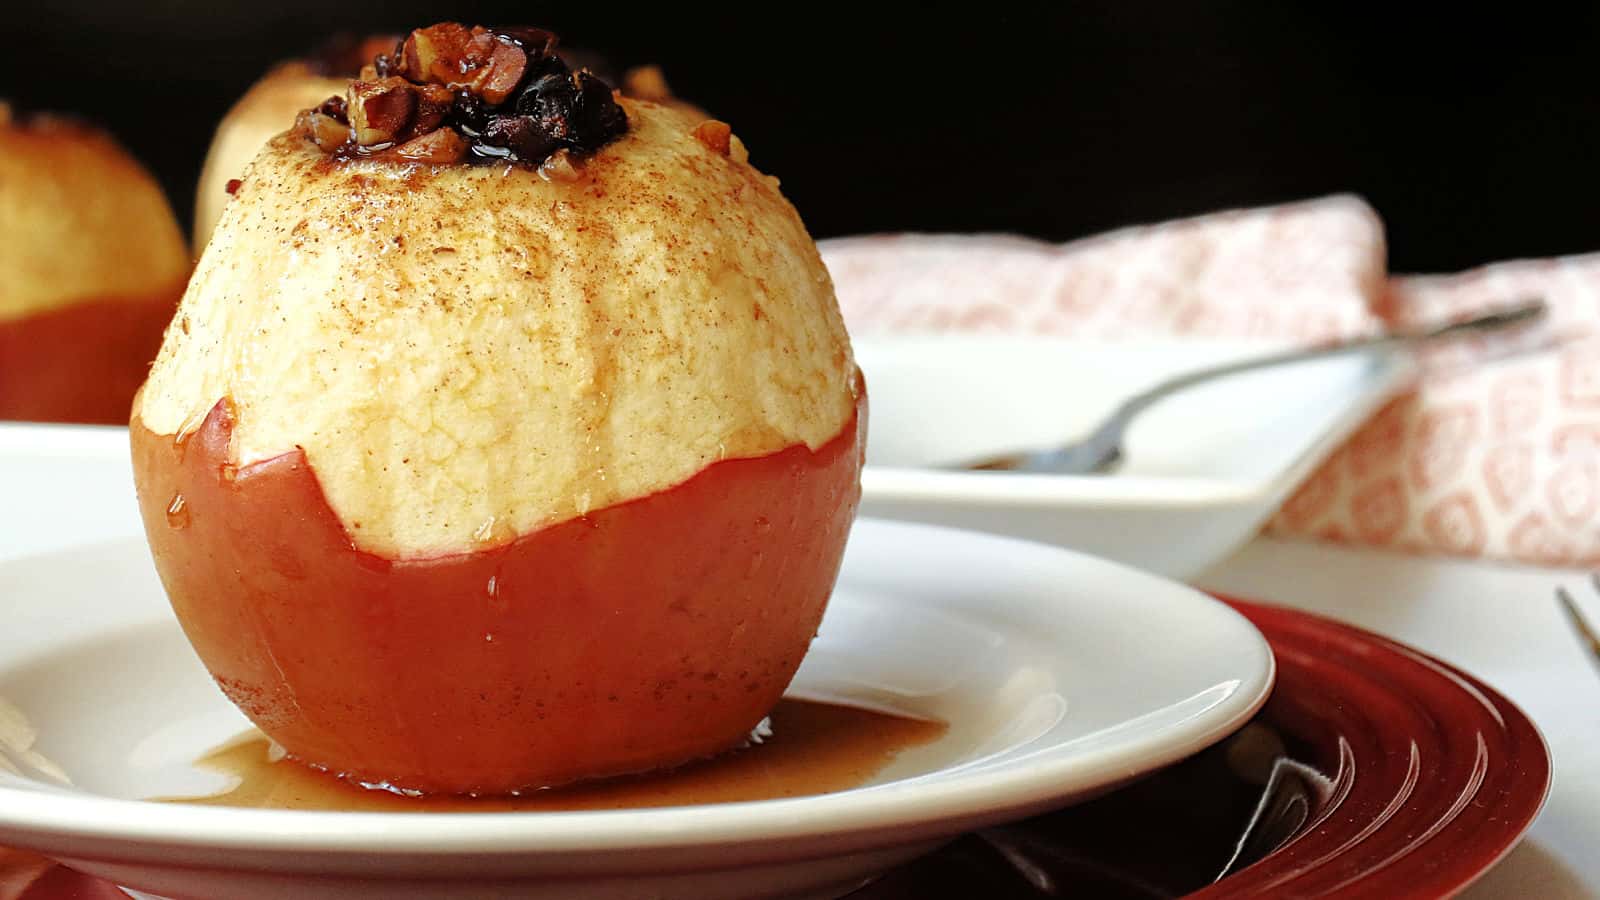 A baked apples on a white plate with a glaze dripping onto a plate.